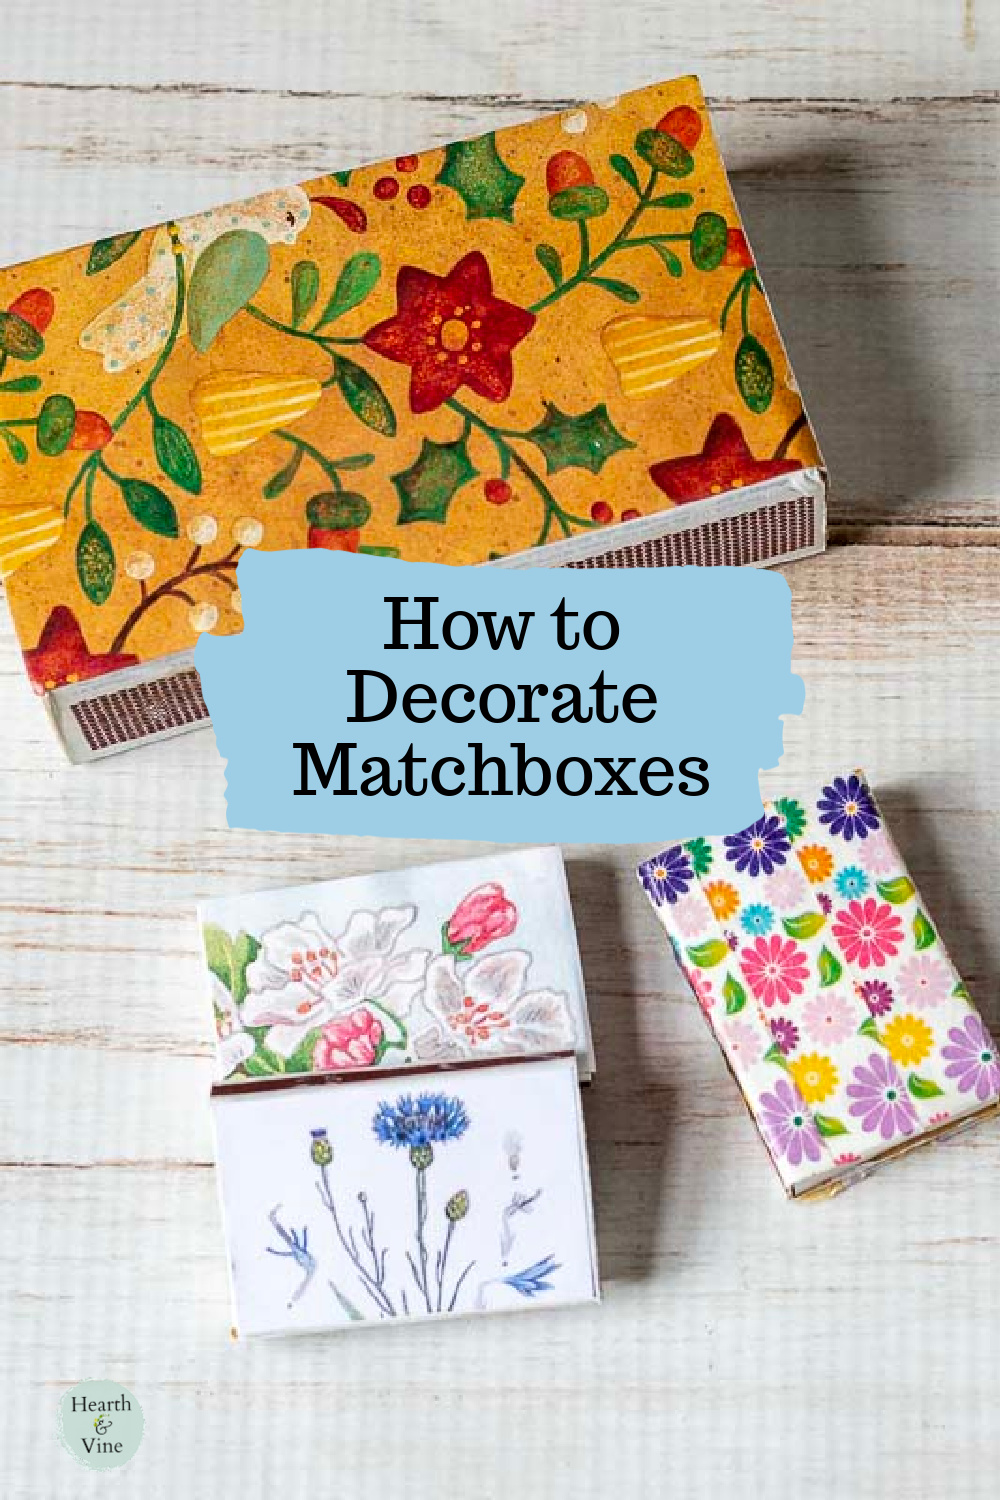 Three small decorative matchboxes with floral prints and a large matchbox with a country print.